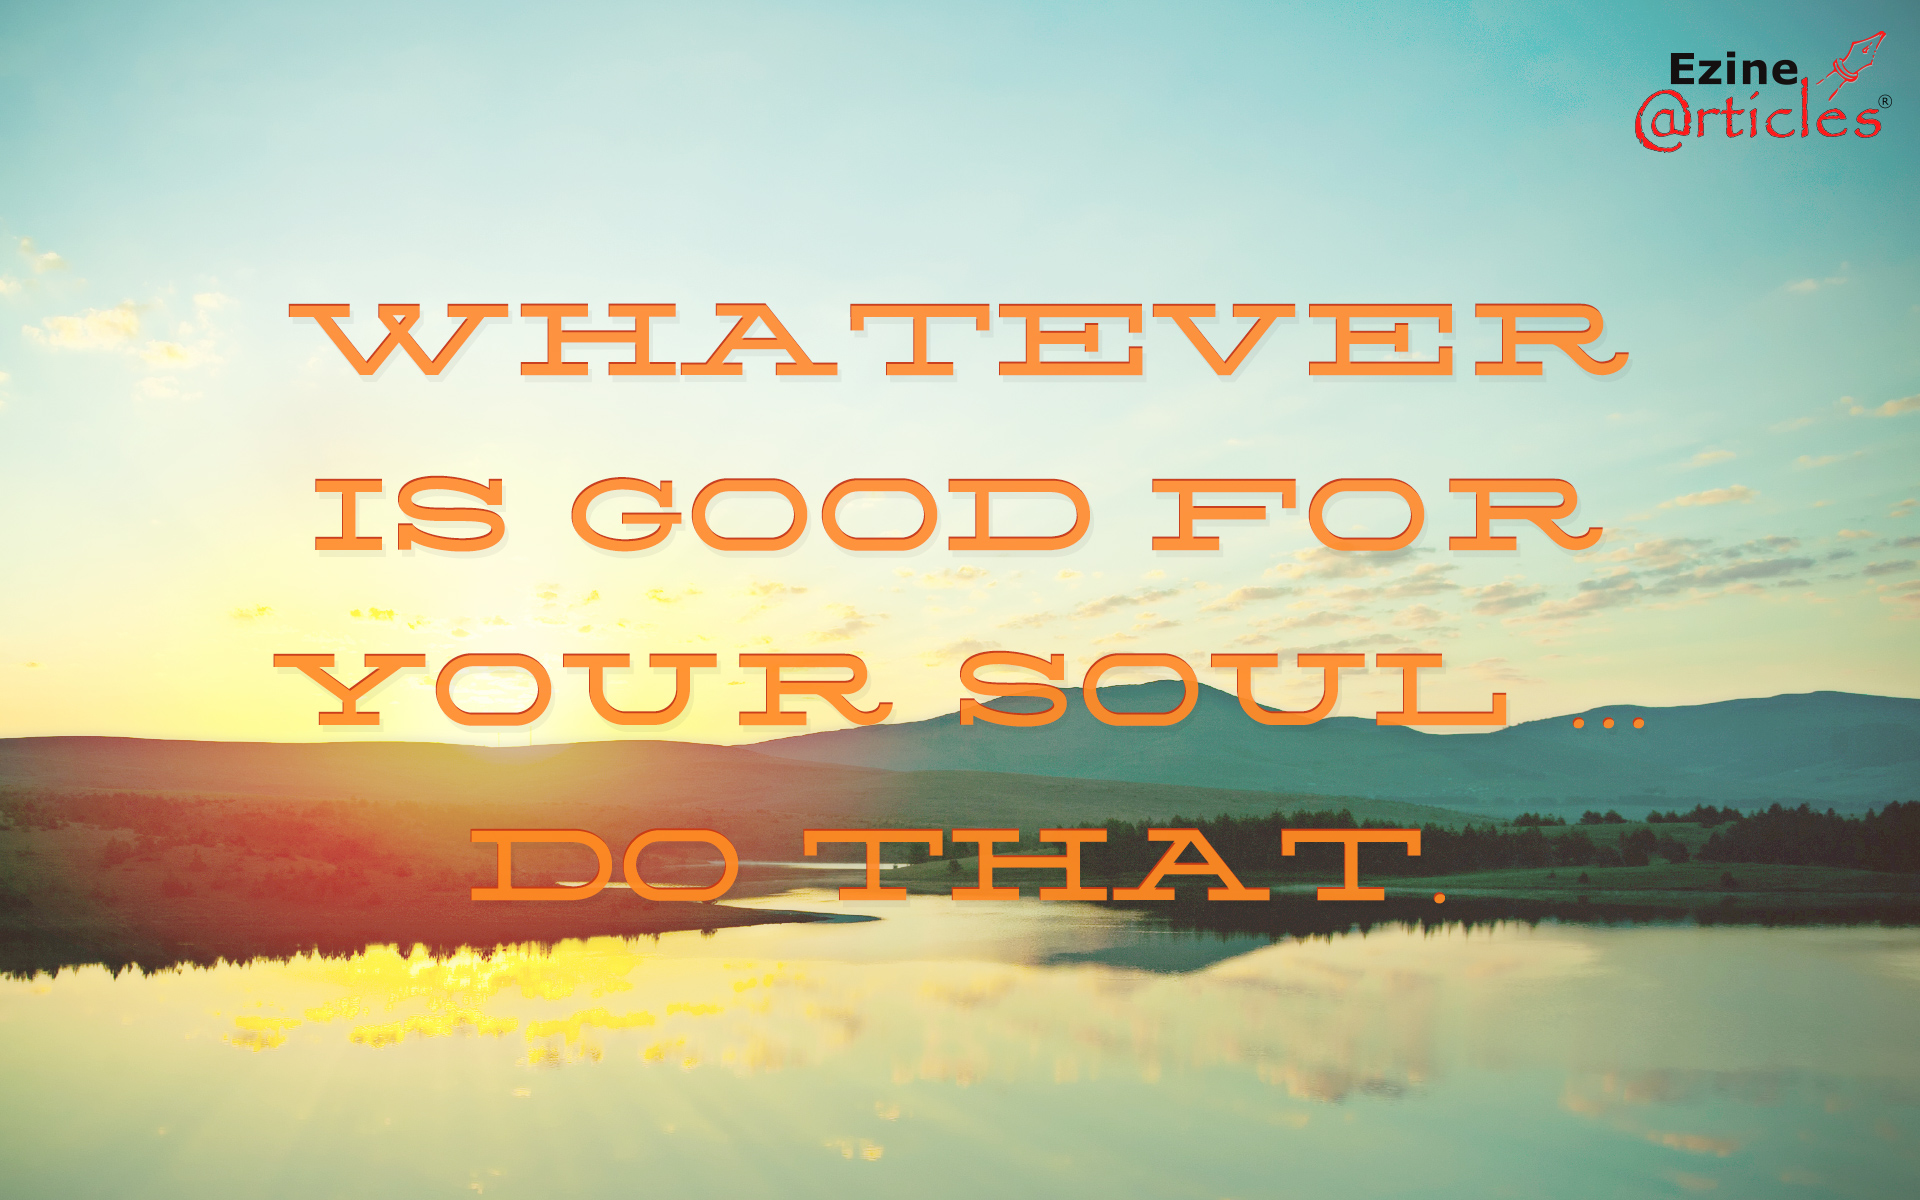 Whatever Is Good For Your Soul Do - HD Wallpaper 